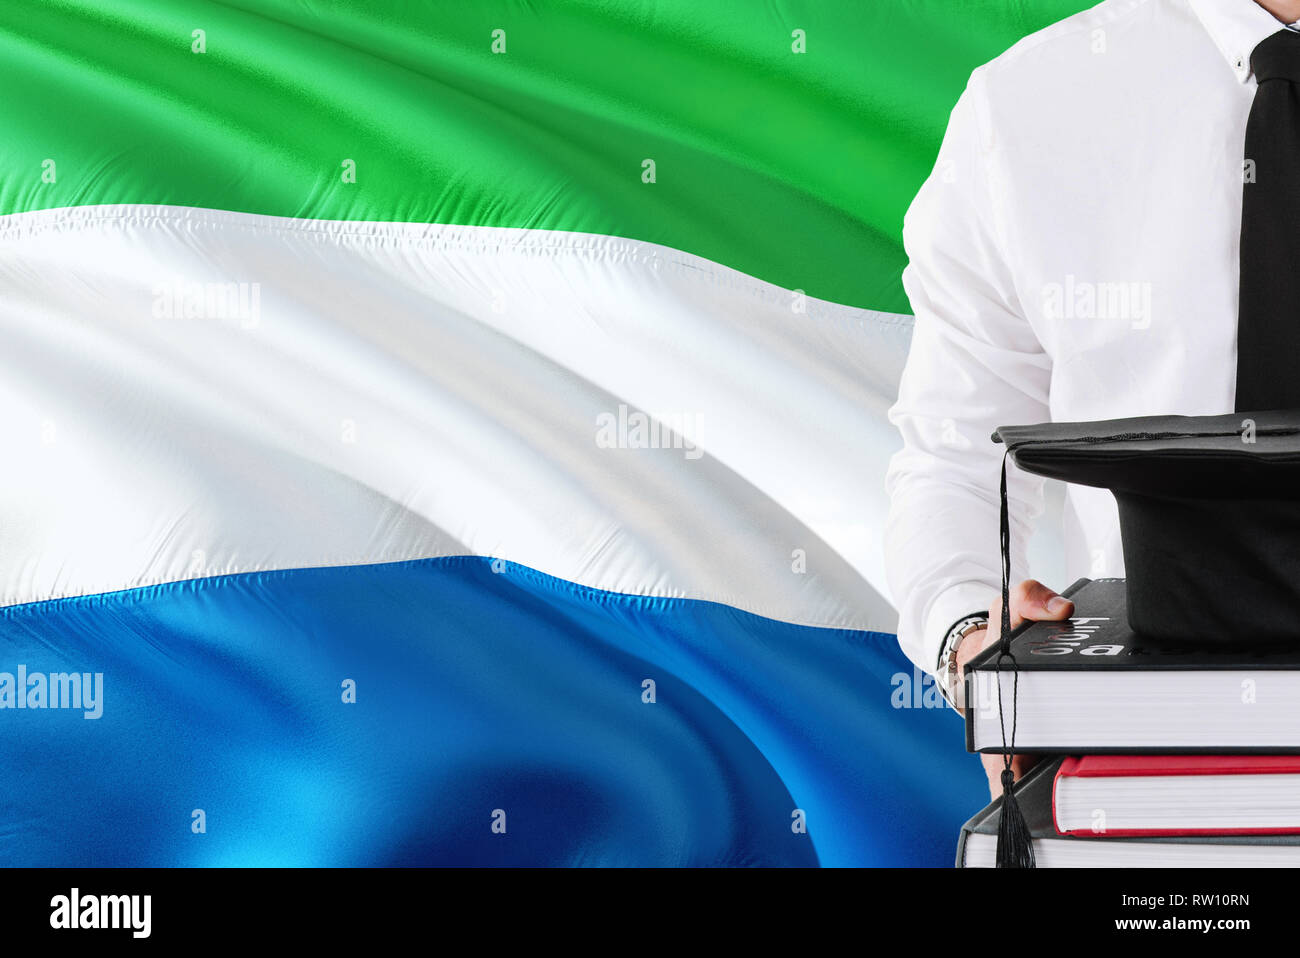 Successful student education concept. Holding books and graduation cap over  Sierra Leone flag background Stock Photo - Alamy